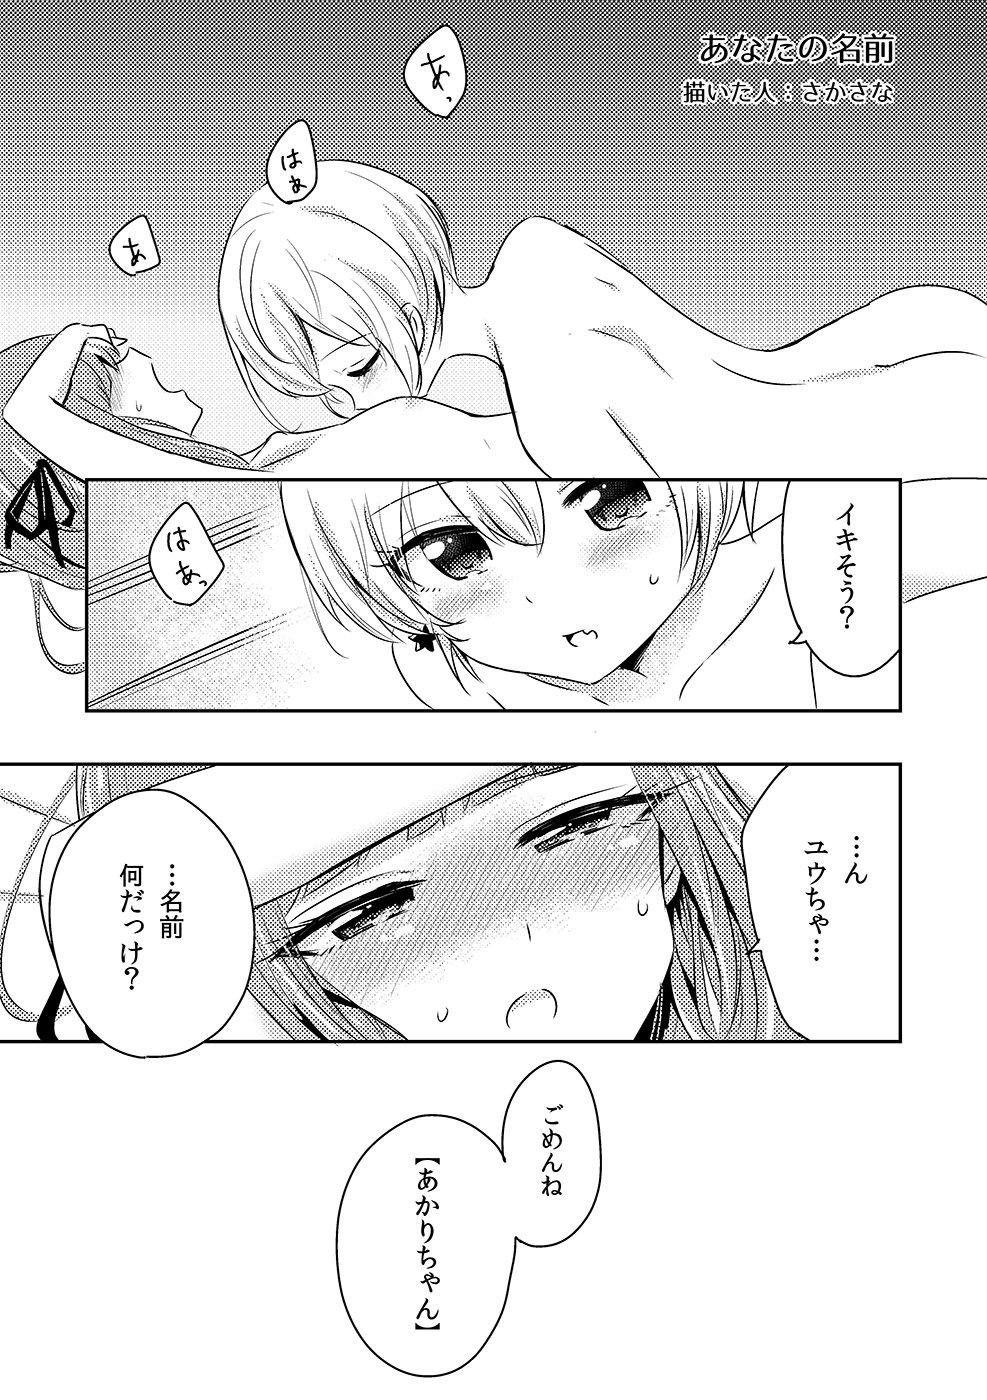 Slim Who contributed to loveless sex joint two years ago! Yuusumi manga. - Aikatsu Titjob - Picture 1